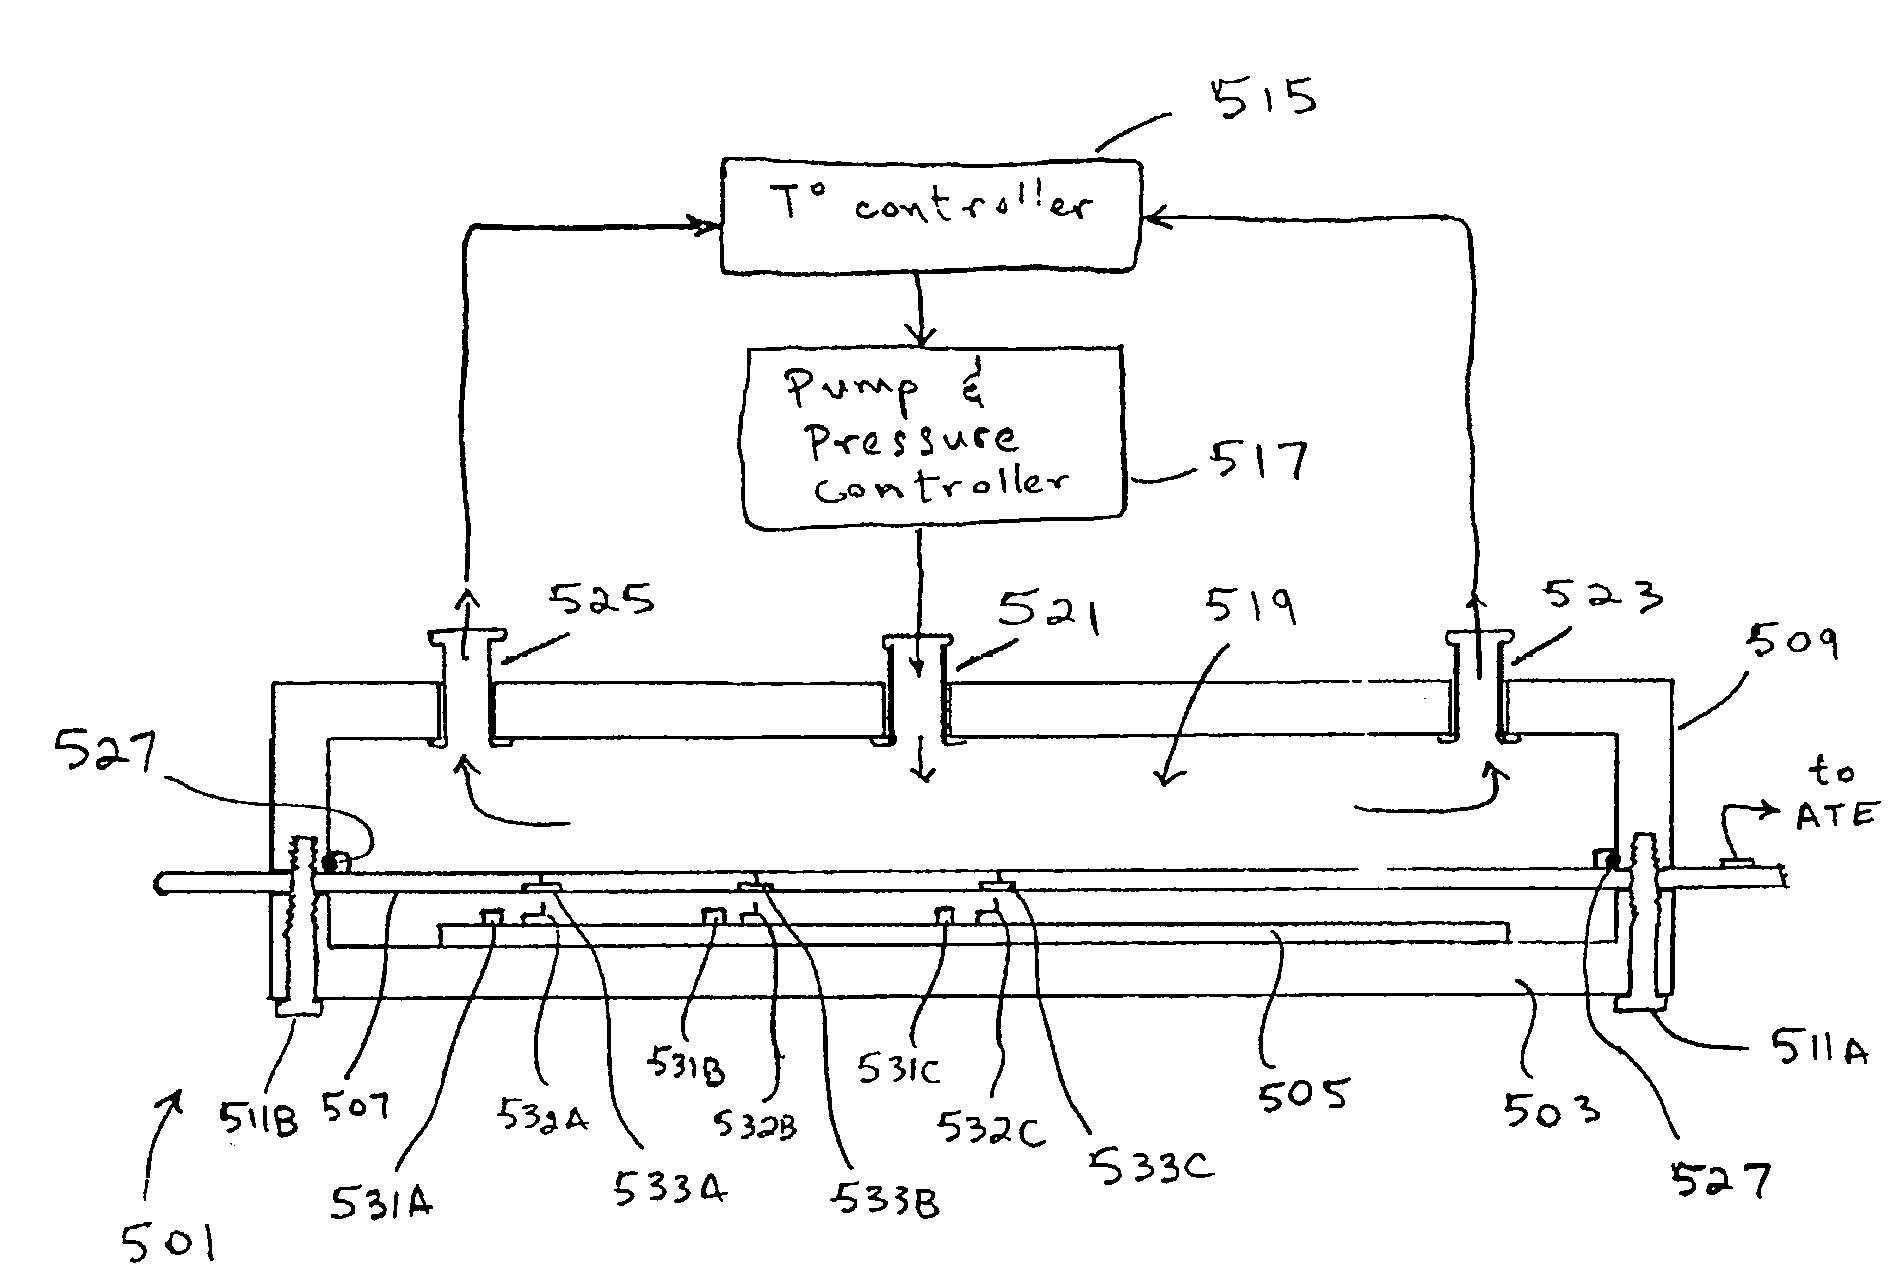 Electrical Contactor, Espcecially Wafer Level Contactor, Using Fluid Pressure